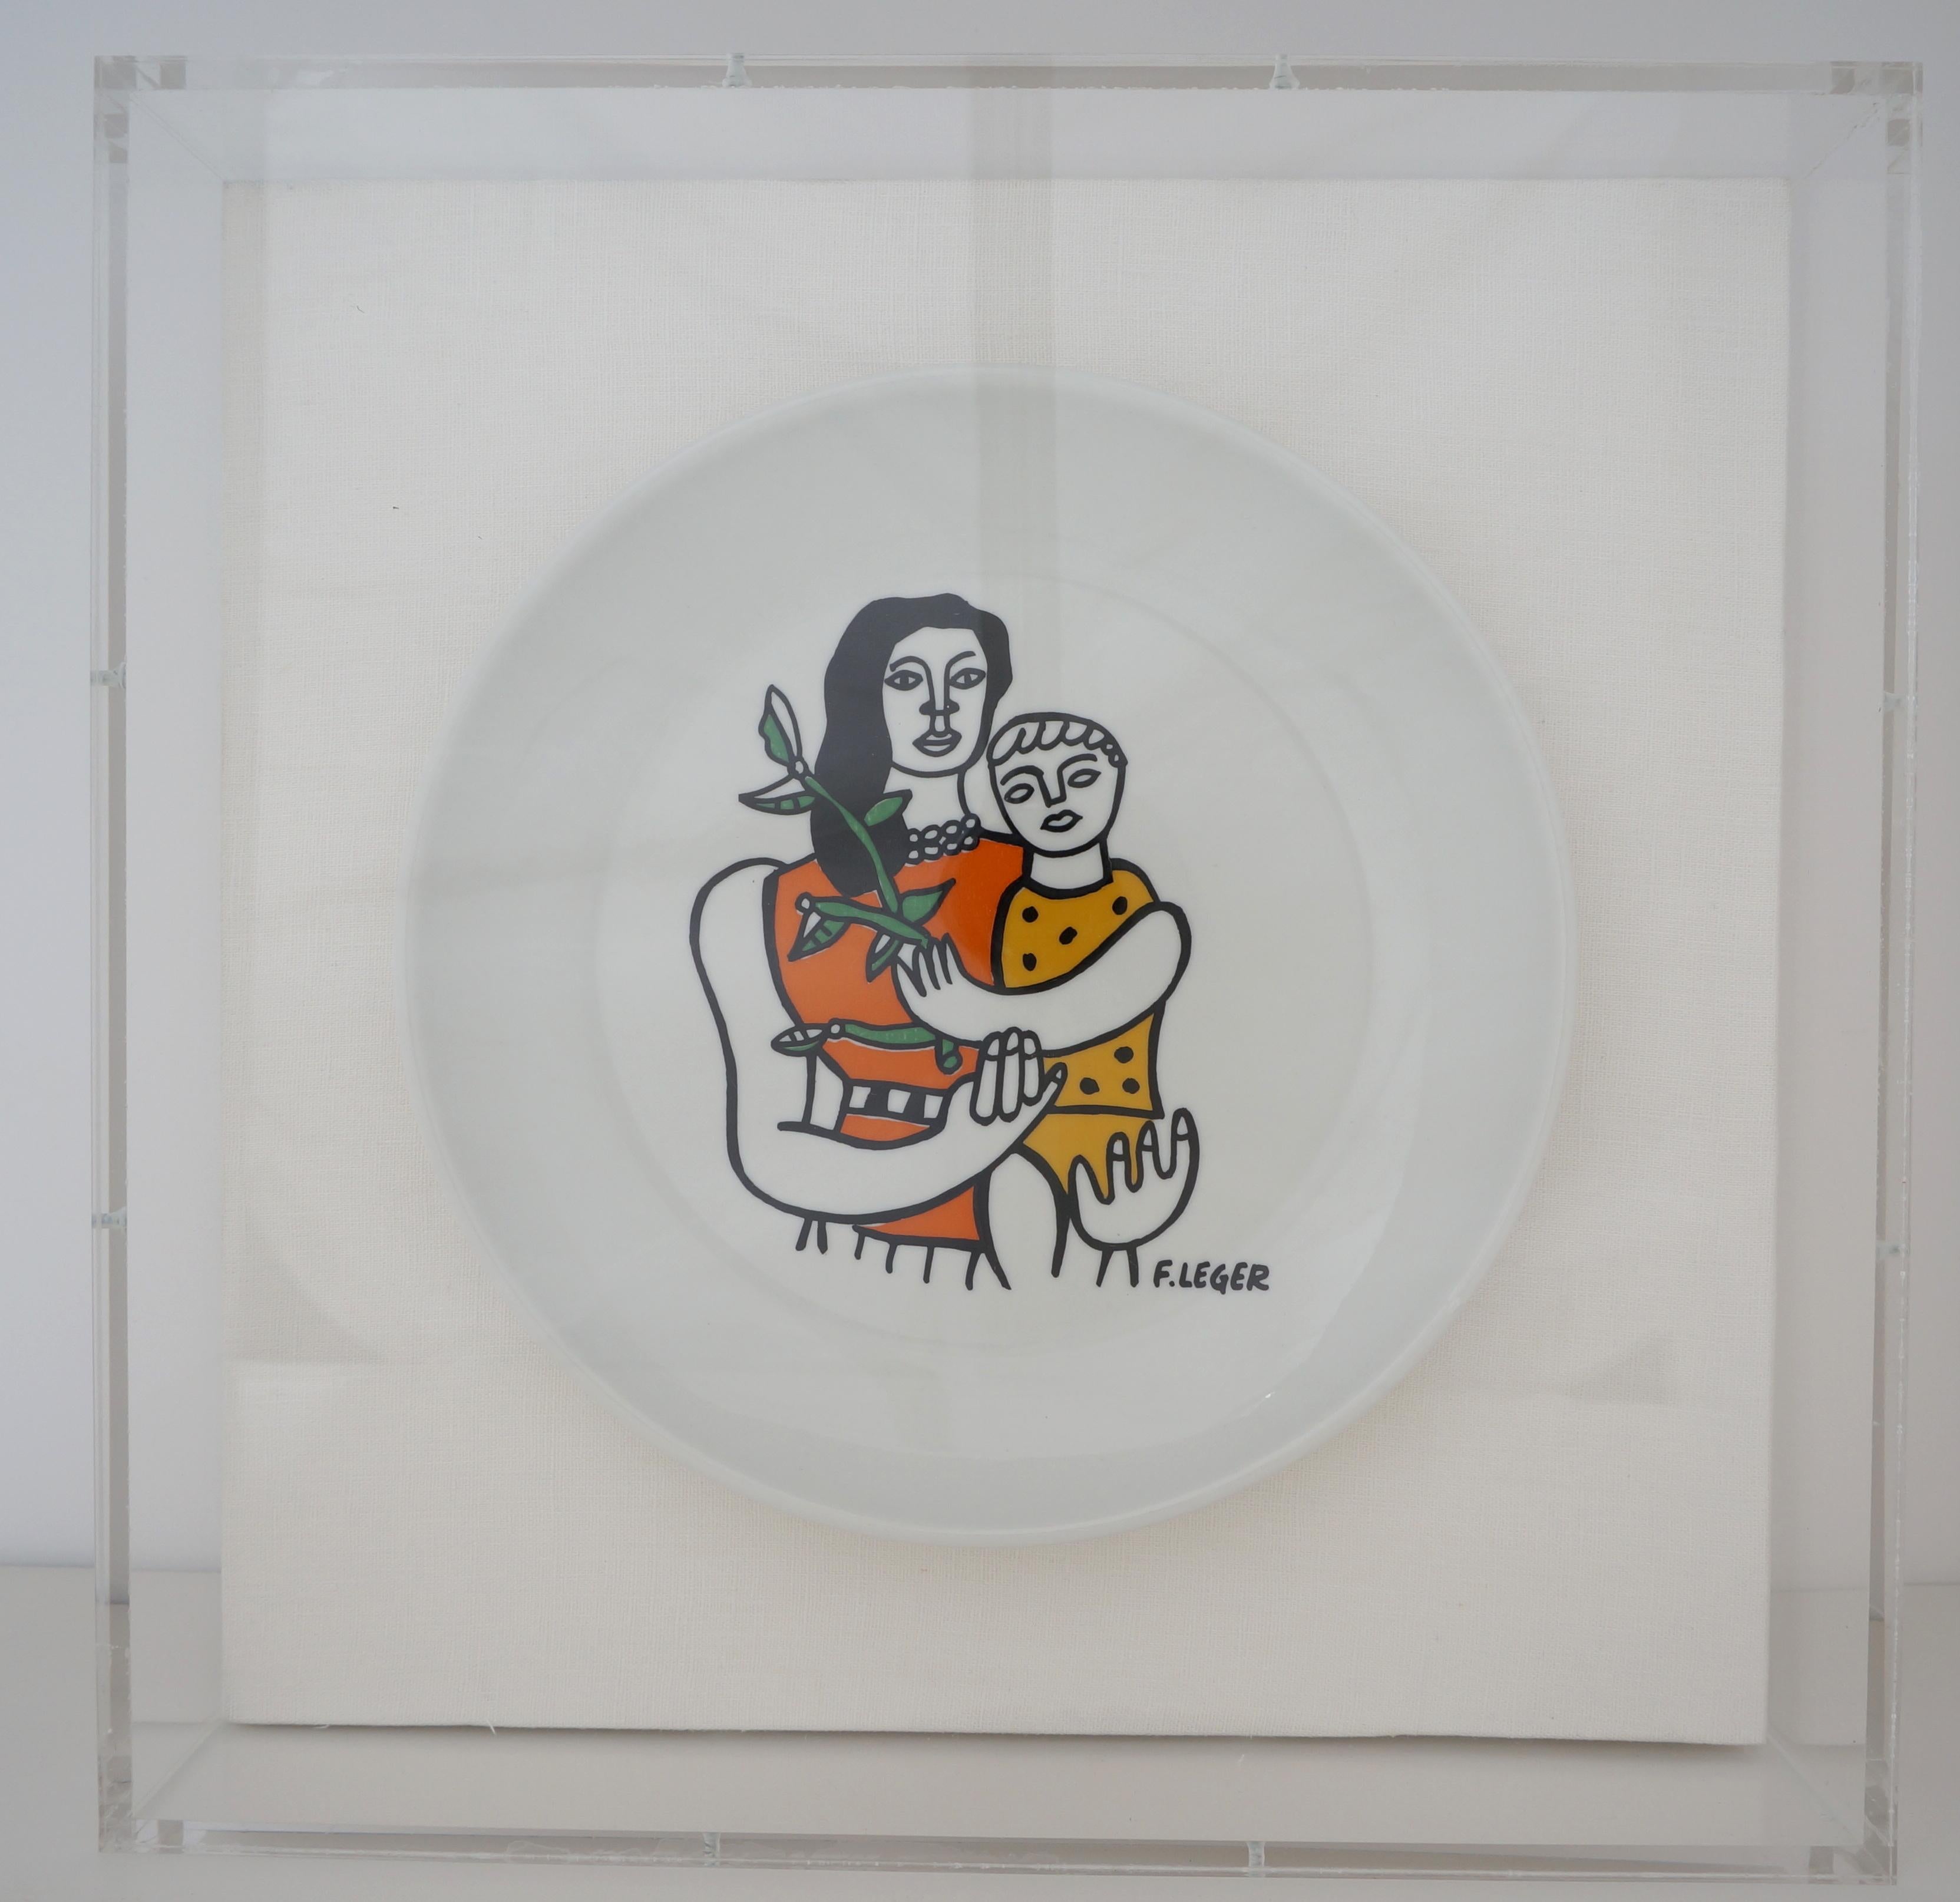 This stylish and chic set of four porcelain plates date to the 1970s and have been professionaly framed as of March 2021 in custom lucite shadow boxes and mounted on a white woven fabric. The pieces are marked on the verso Editions S.E.A.L